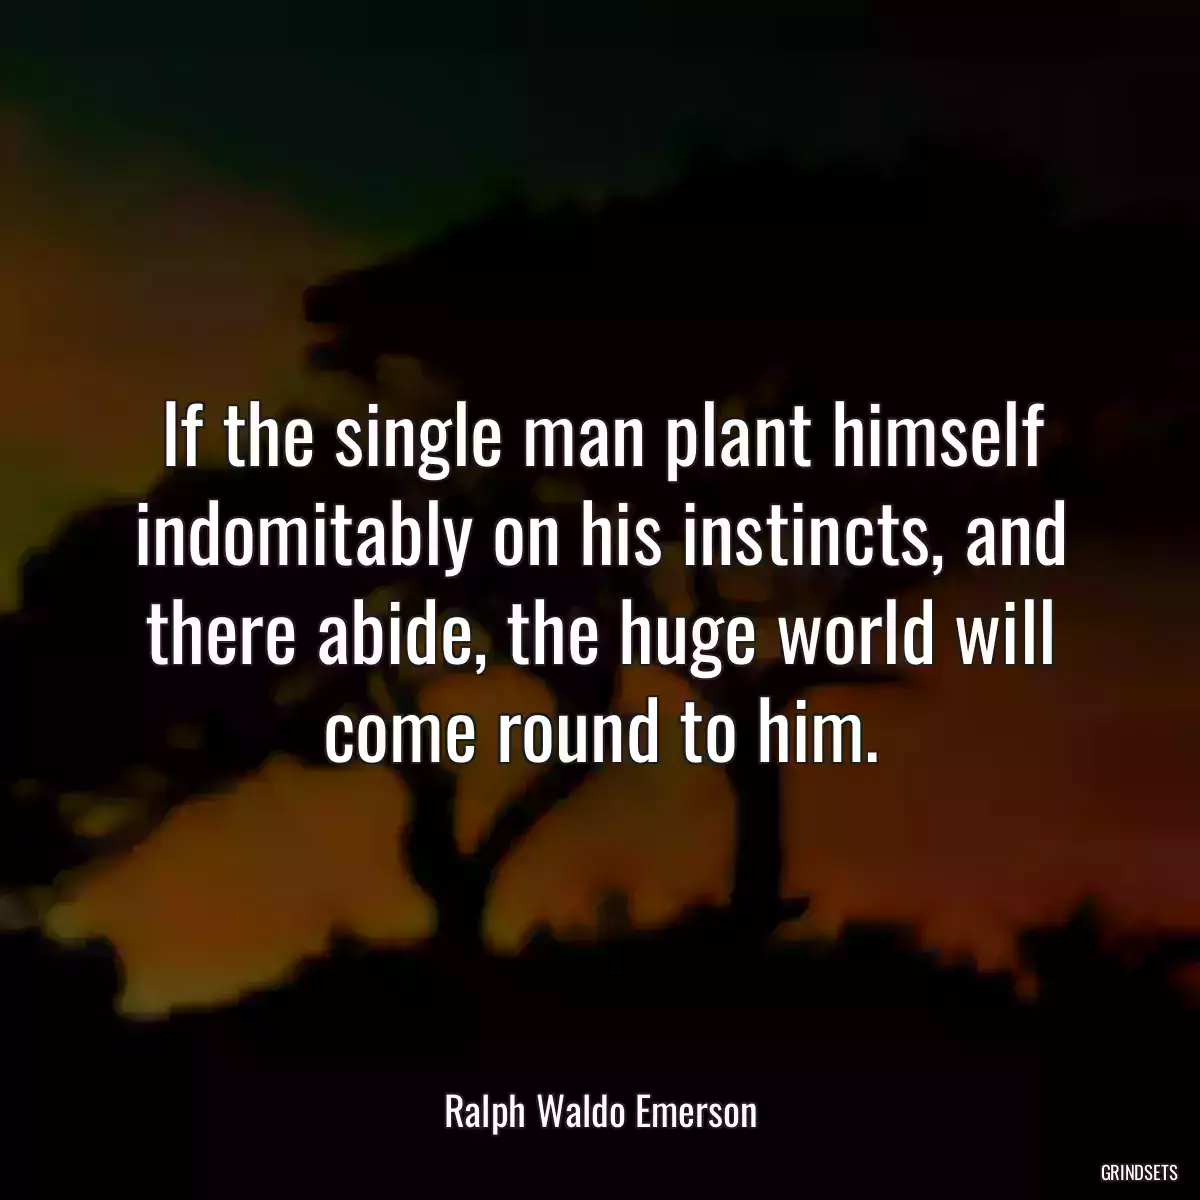 If the single man plant himself indomitably on his instincts, and there abide, the huge world will come round to him.